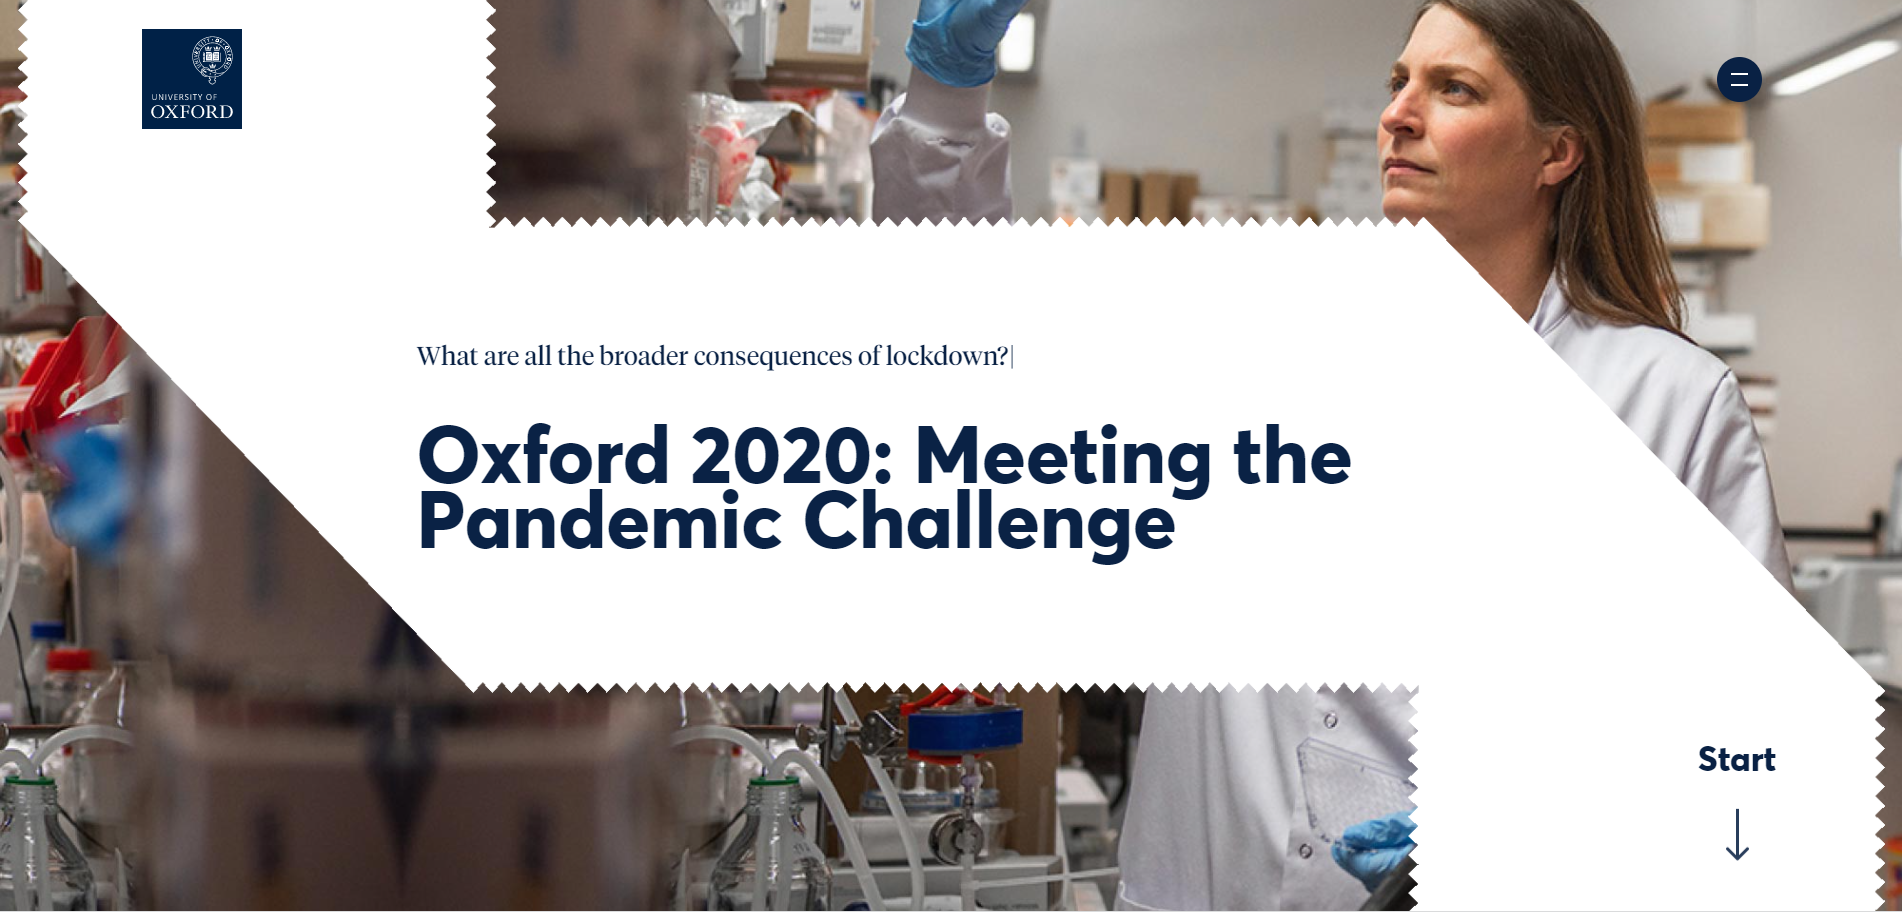 A photograph of a biomedical scientist in a white lab coat and inspecting a vial is superimposed by a white banner with blue text that reads "Oxford 2020: Meeting the Pandemic Challenge"